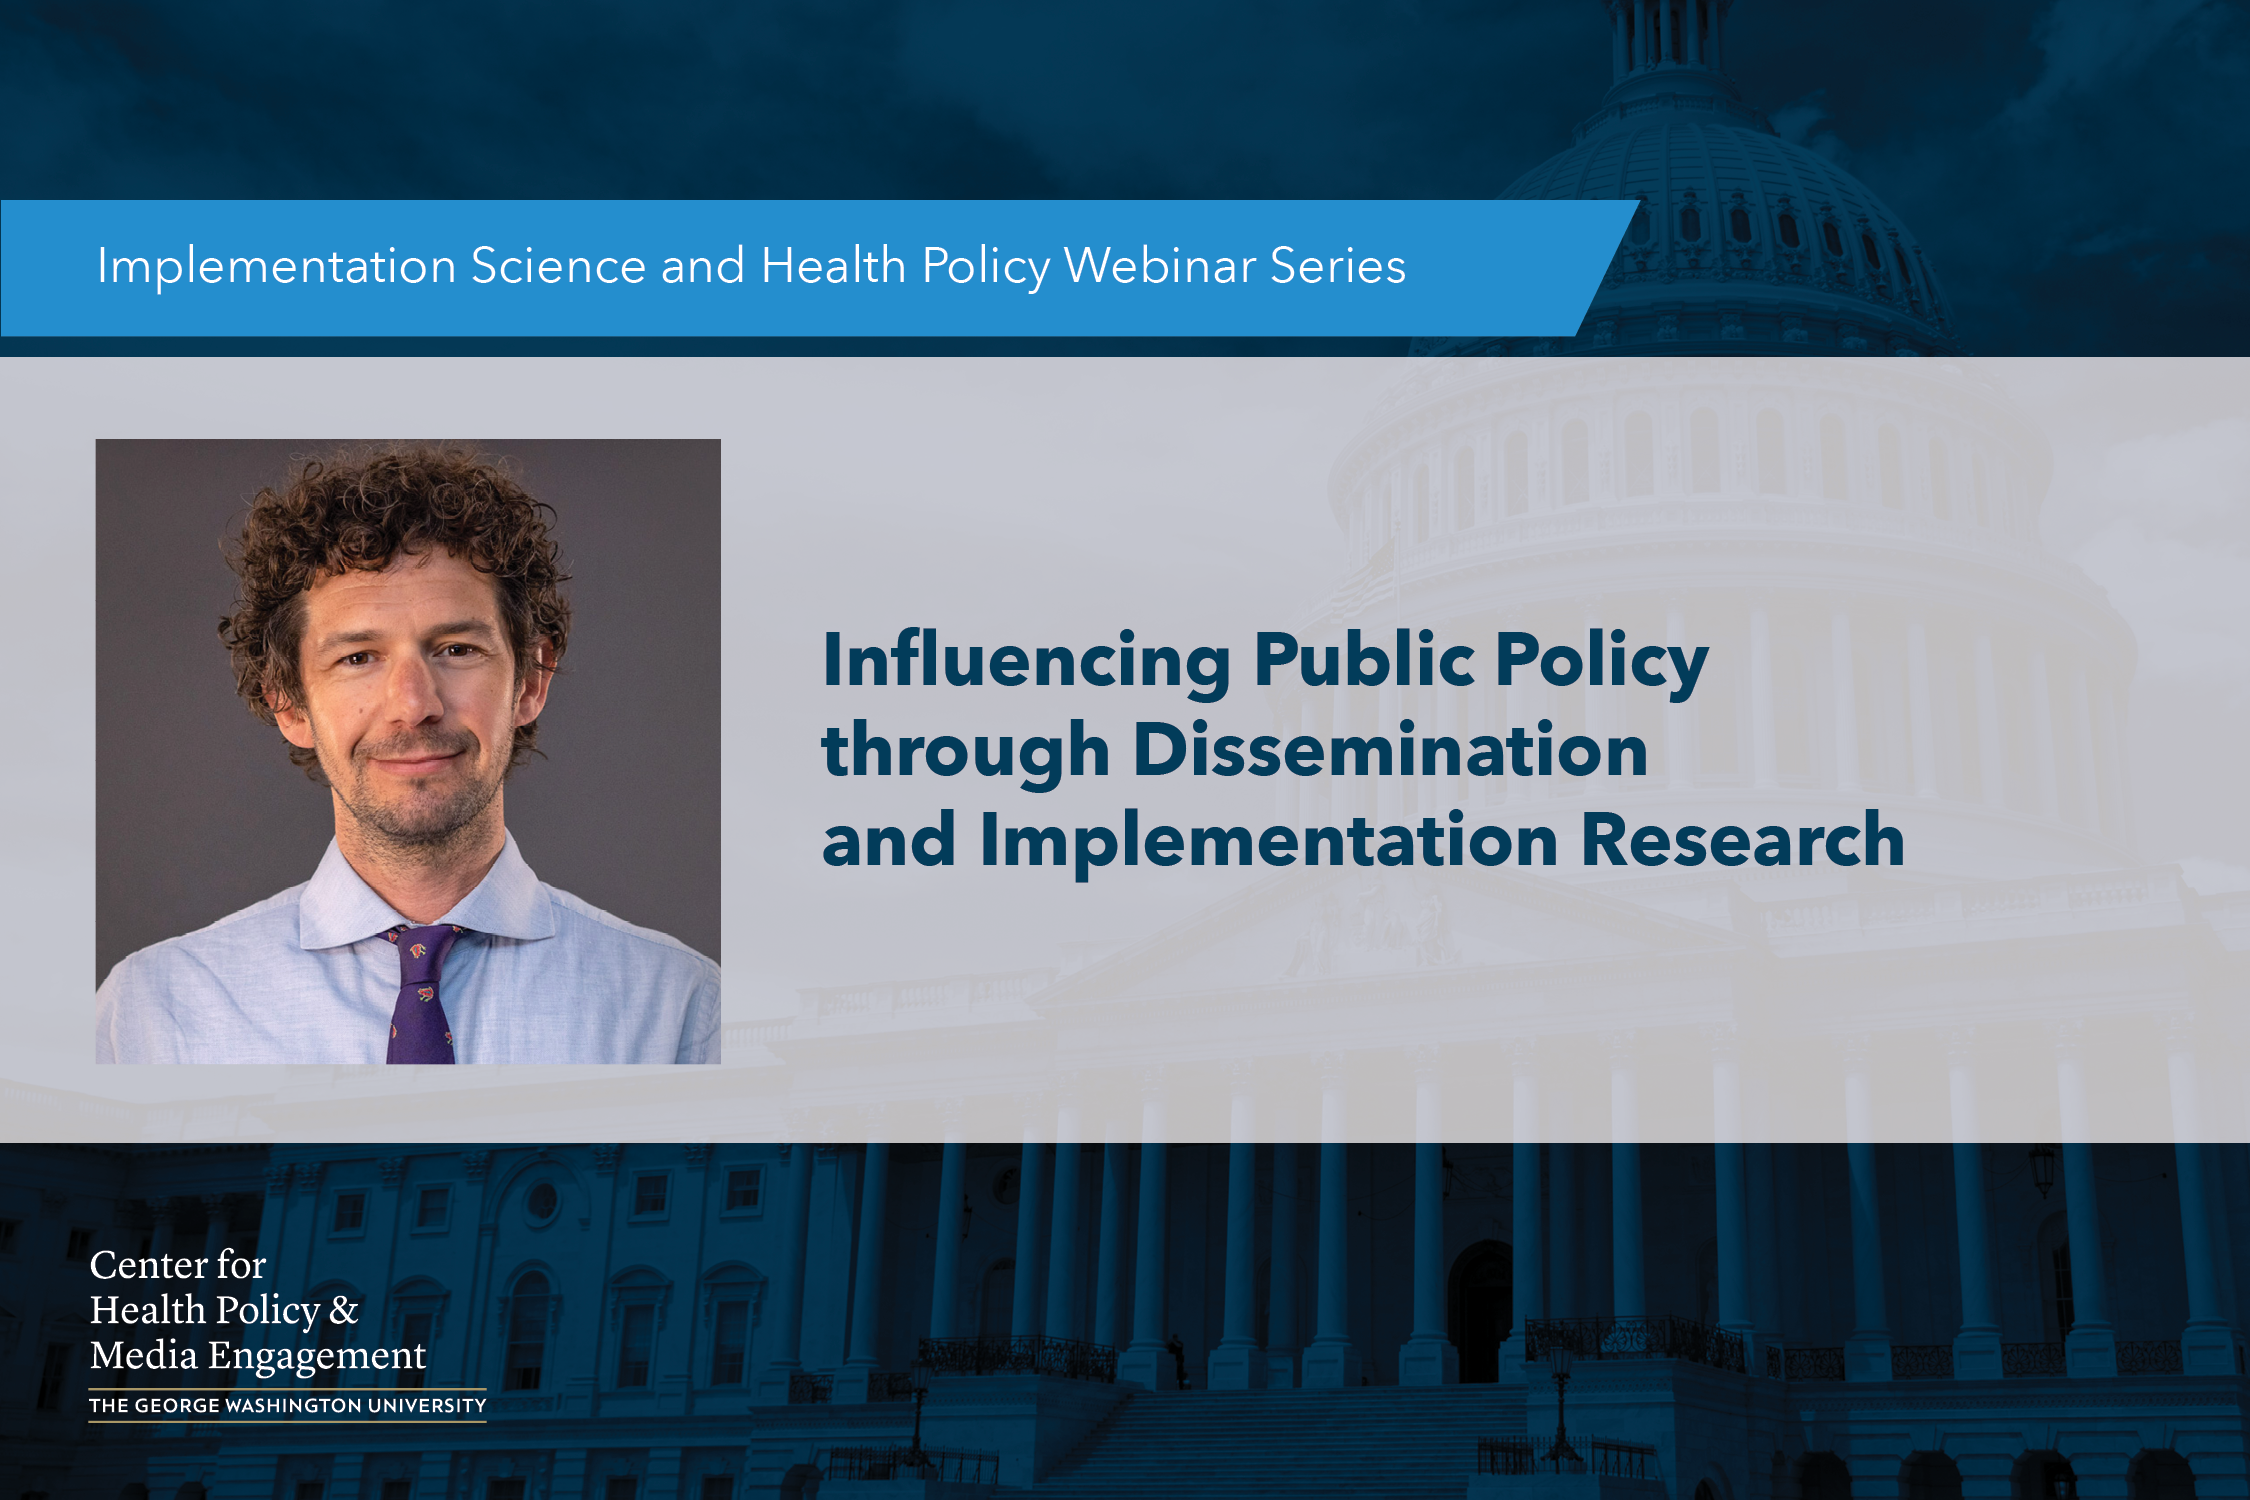 Influencing Public Policy through Dissemination and Implementation Research